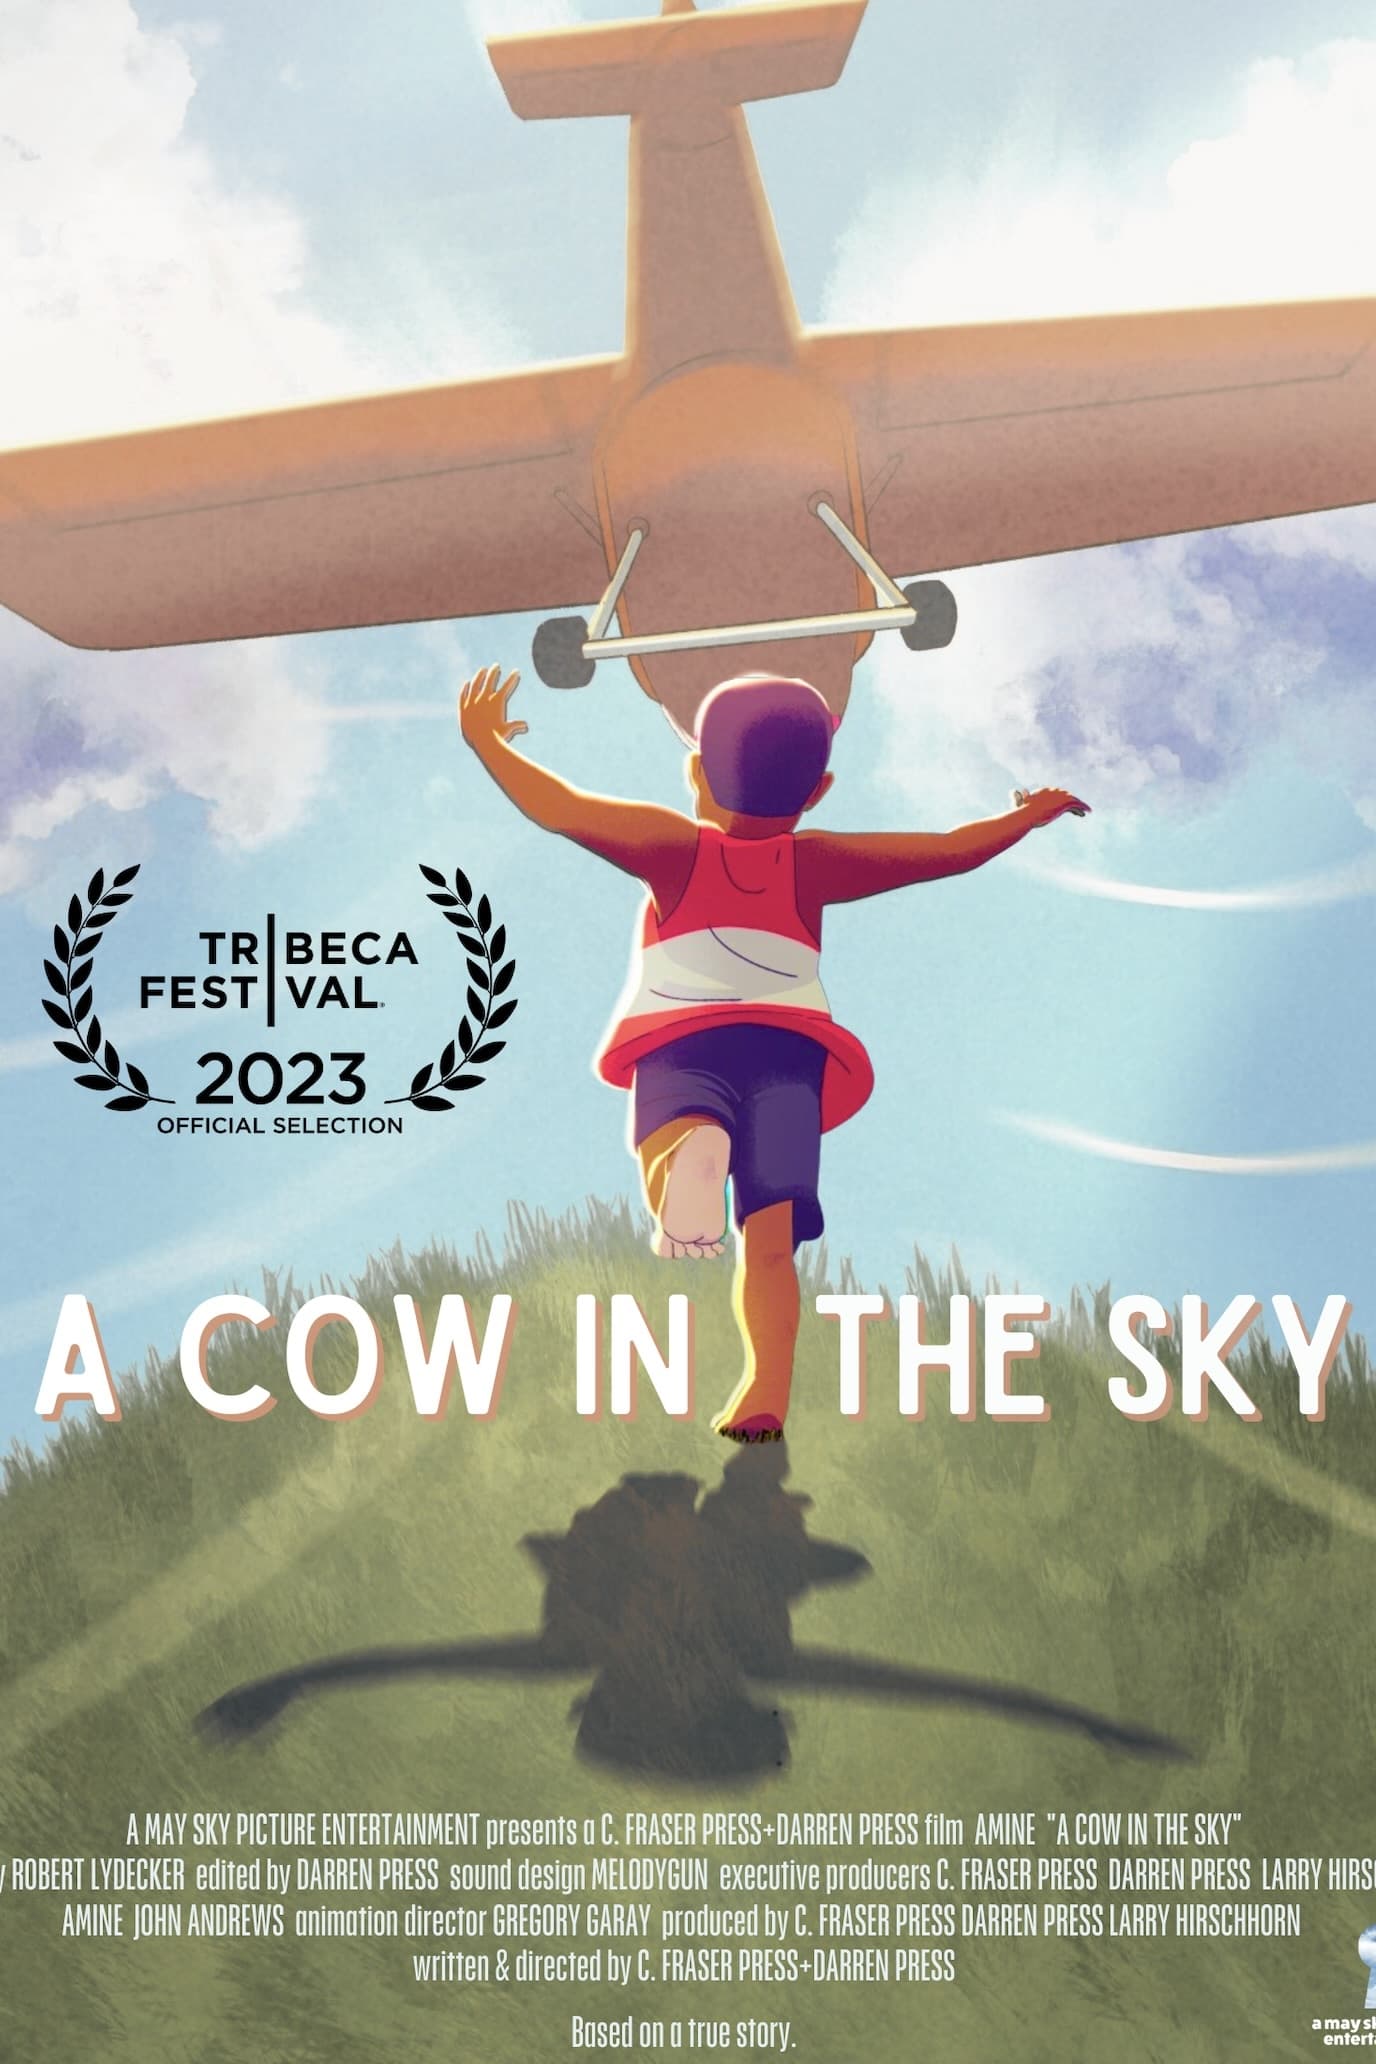 A Cow in the Sky